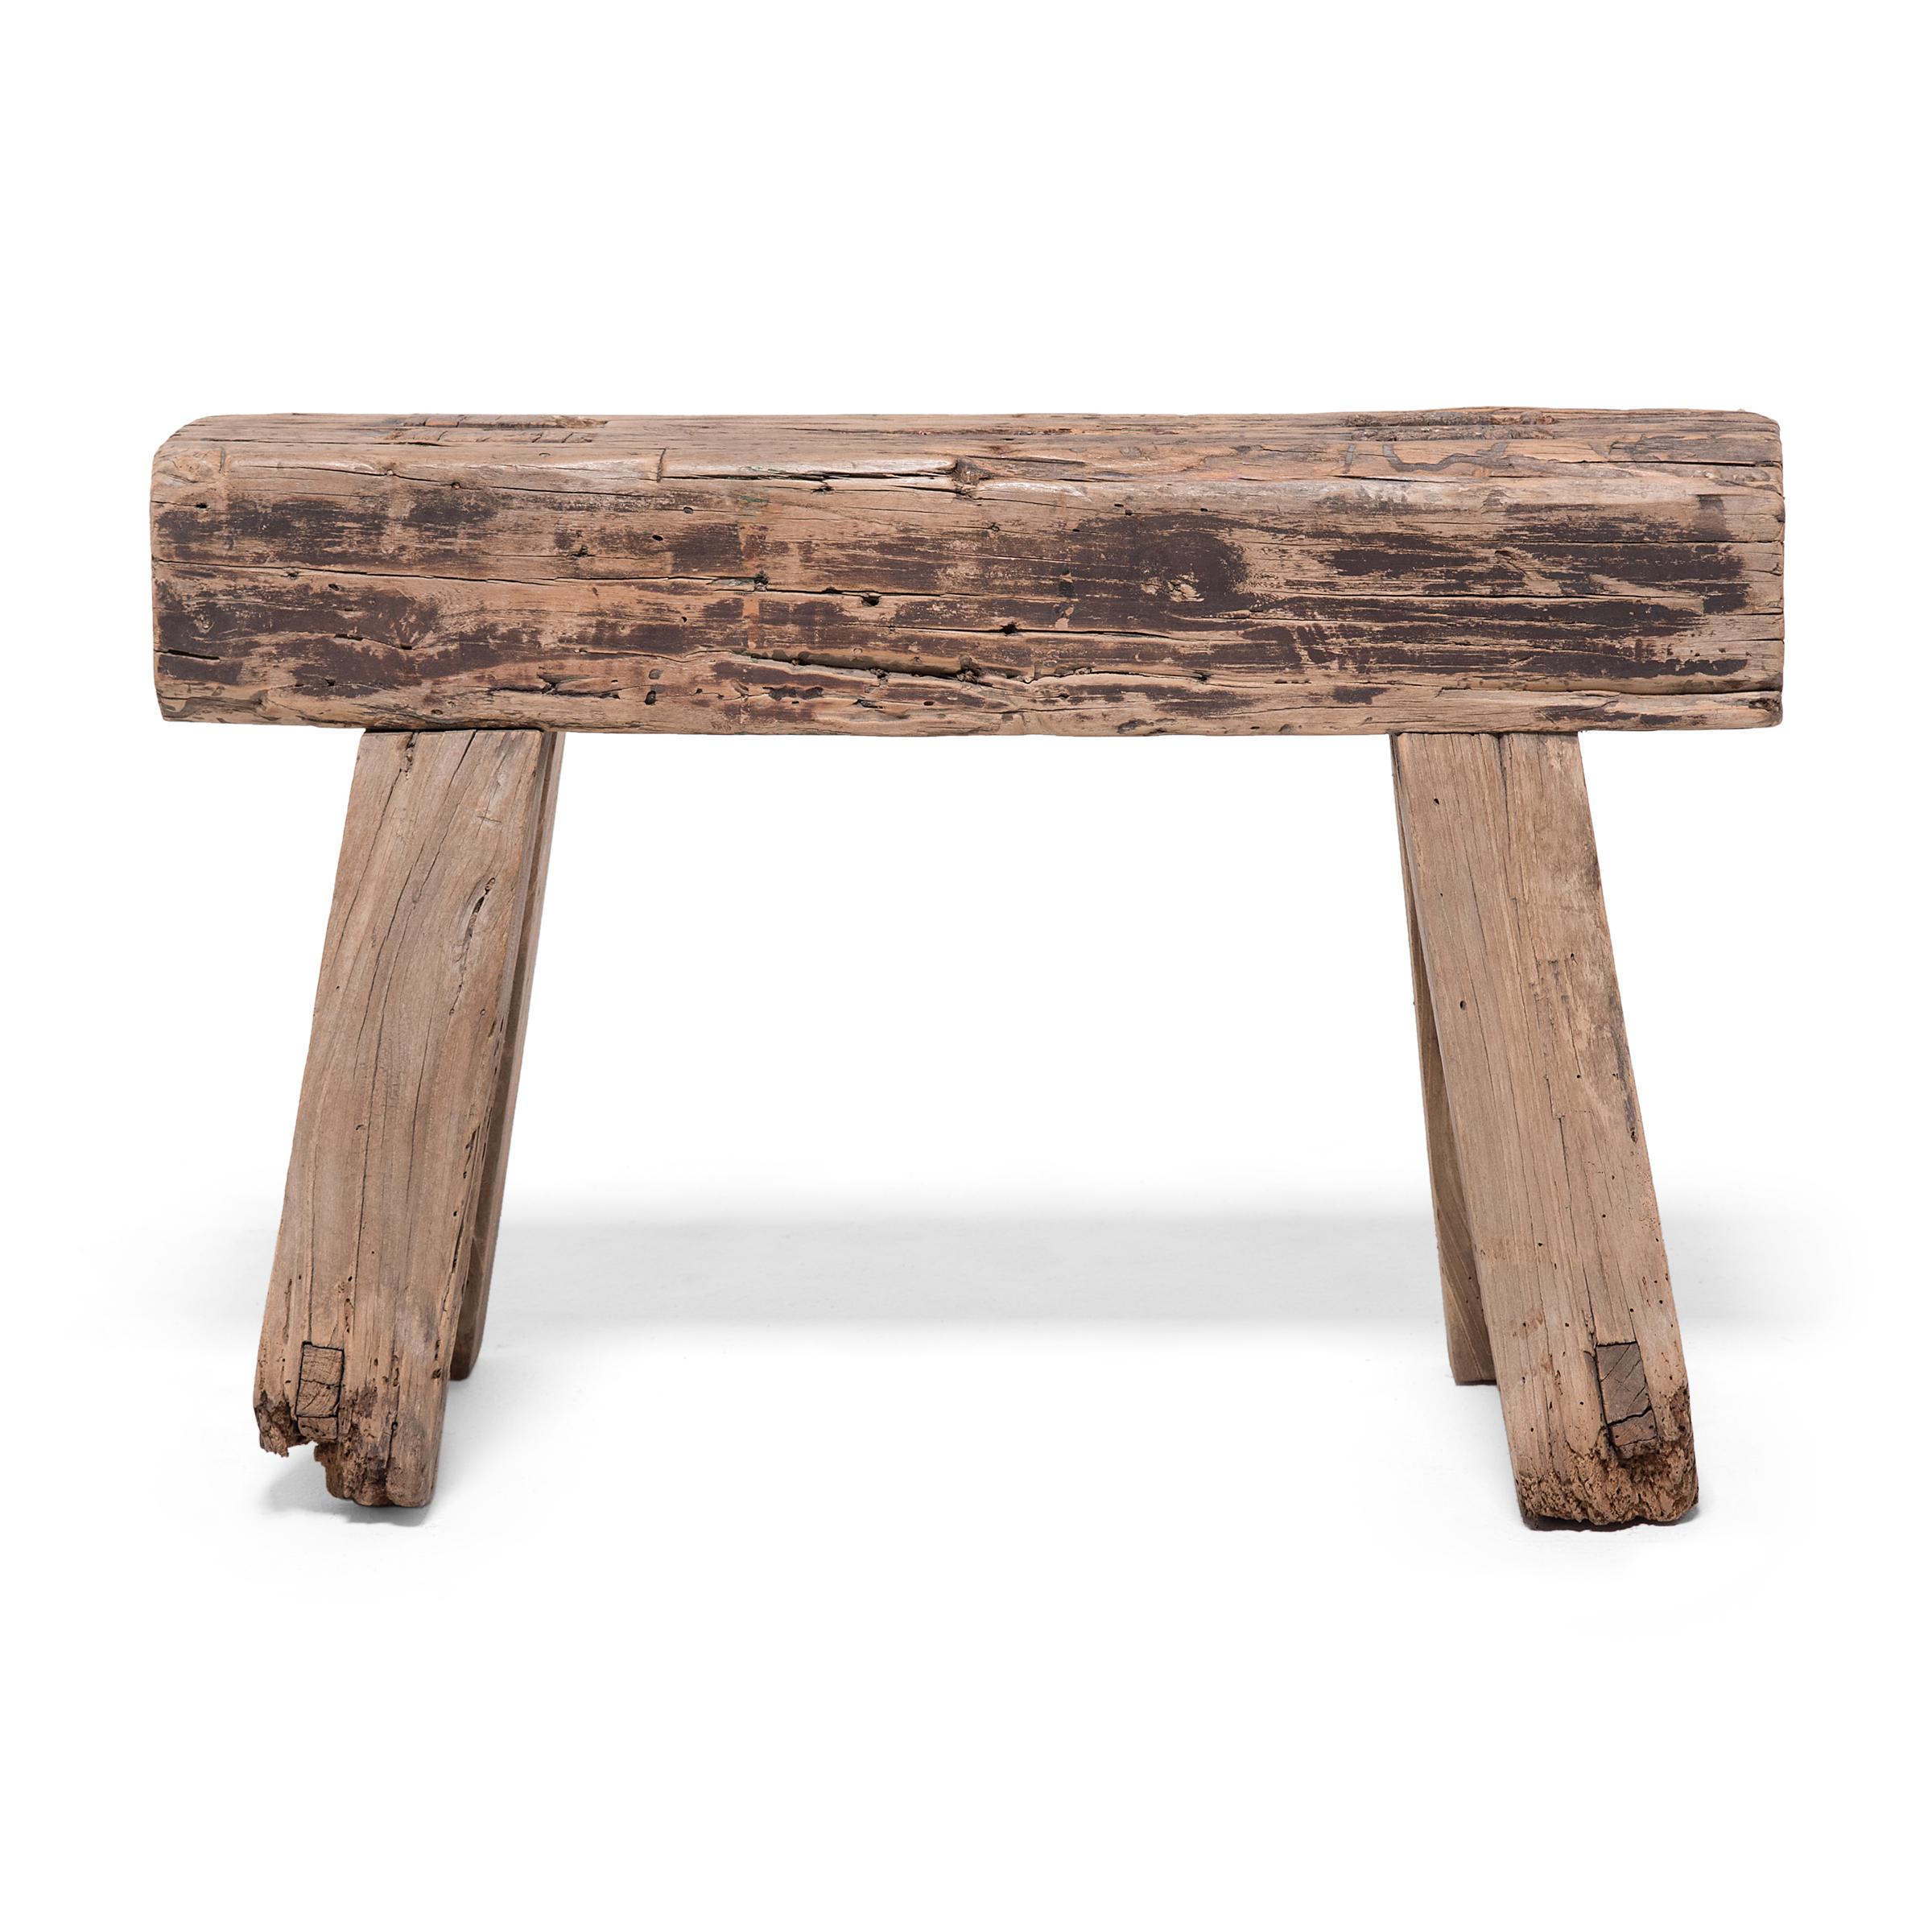 This short bench from Hebei province exemplifies rustic style with its simple design and wonderfully aged surface. Constructed of northern elm (yumu) using mortise-and-tenon joinery methods, the bench features splayed legs made of scrap wood and a